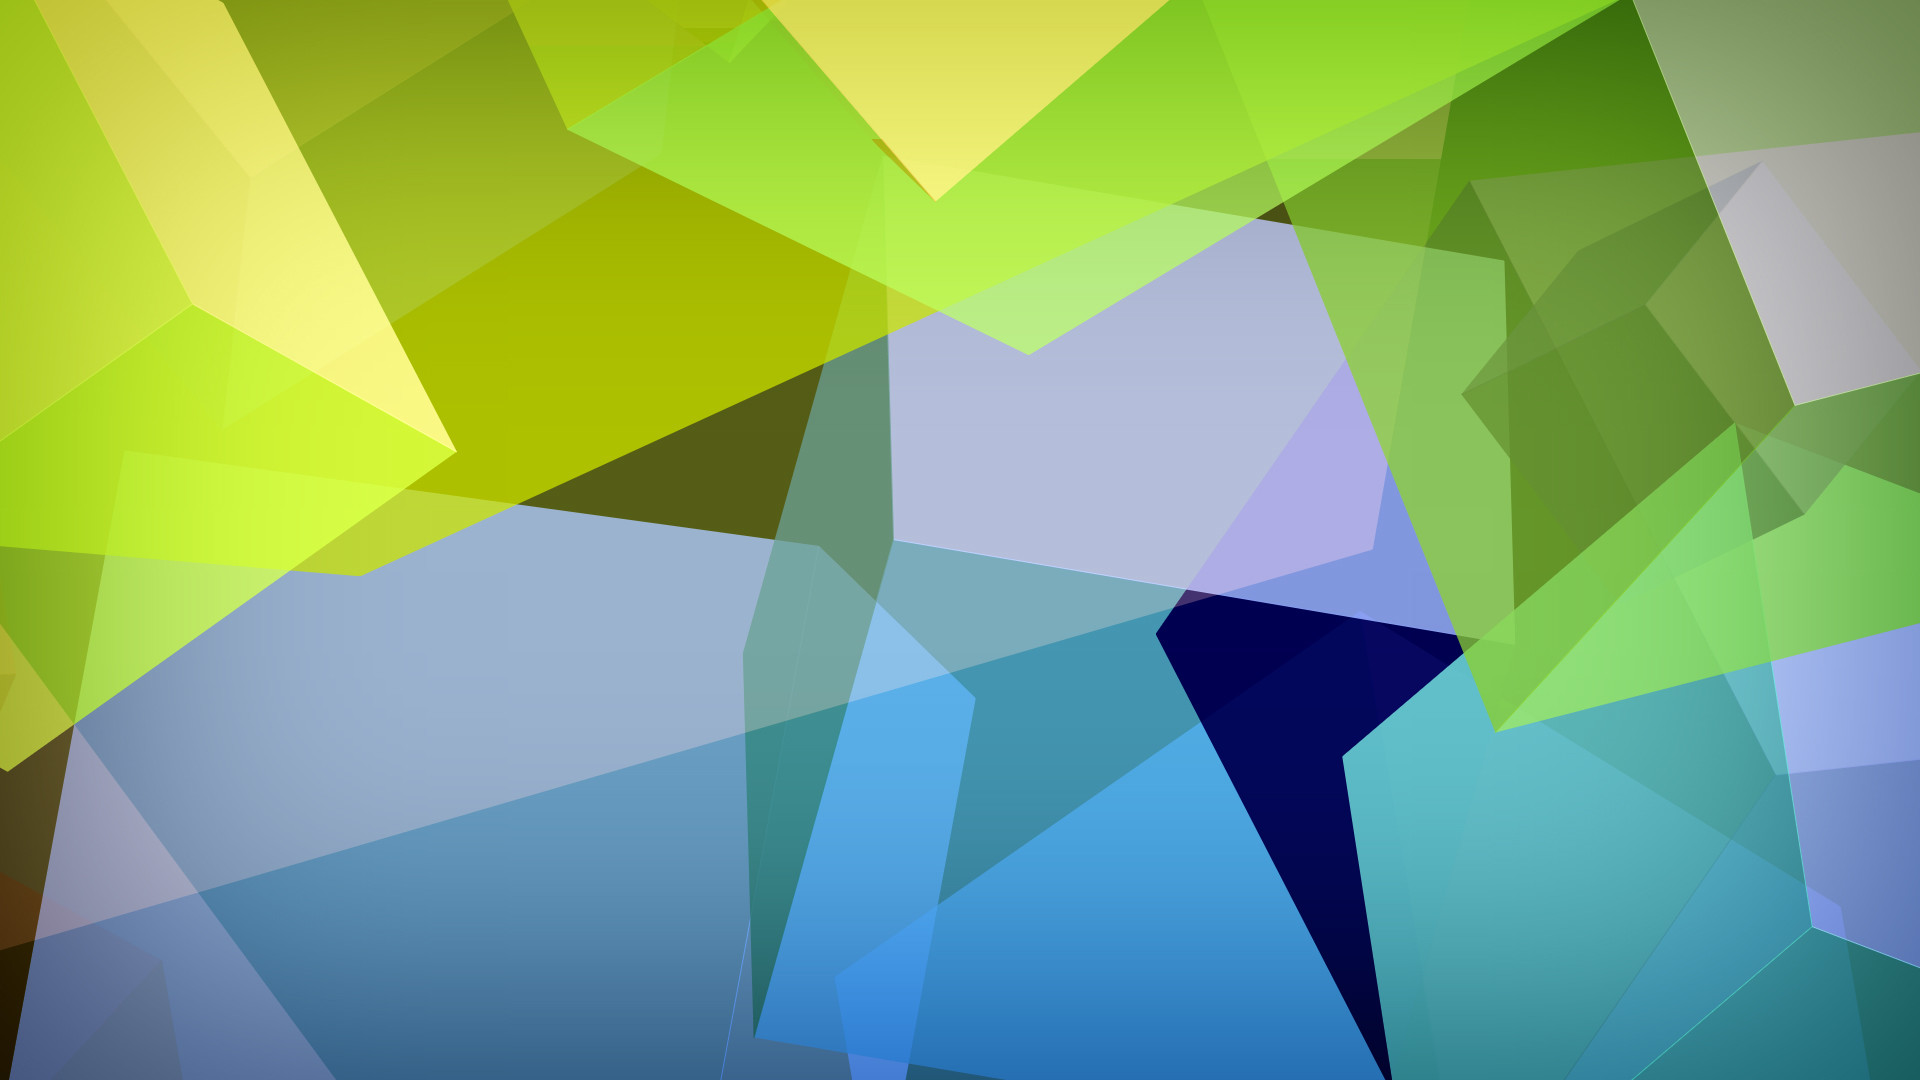 1920x1080 abstract-wallpapers-shapes-colored-geometric-wallpaper.jpg